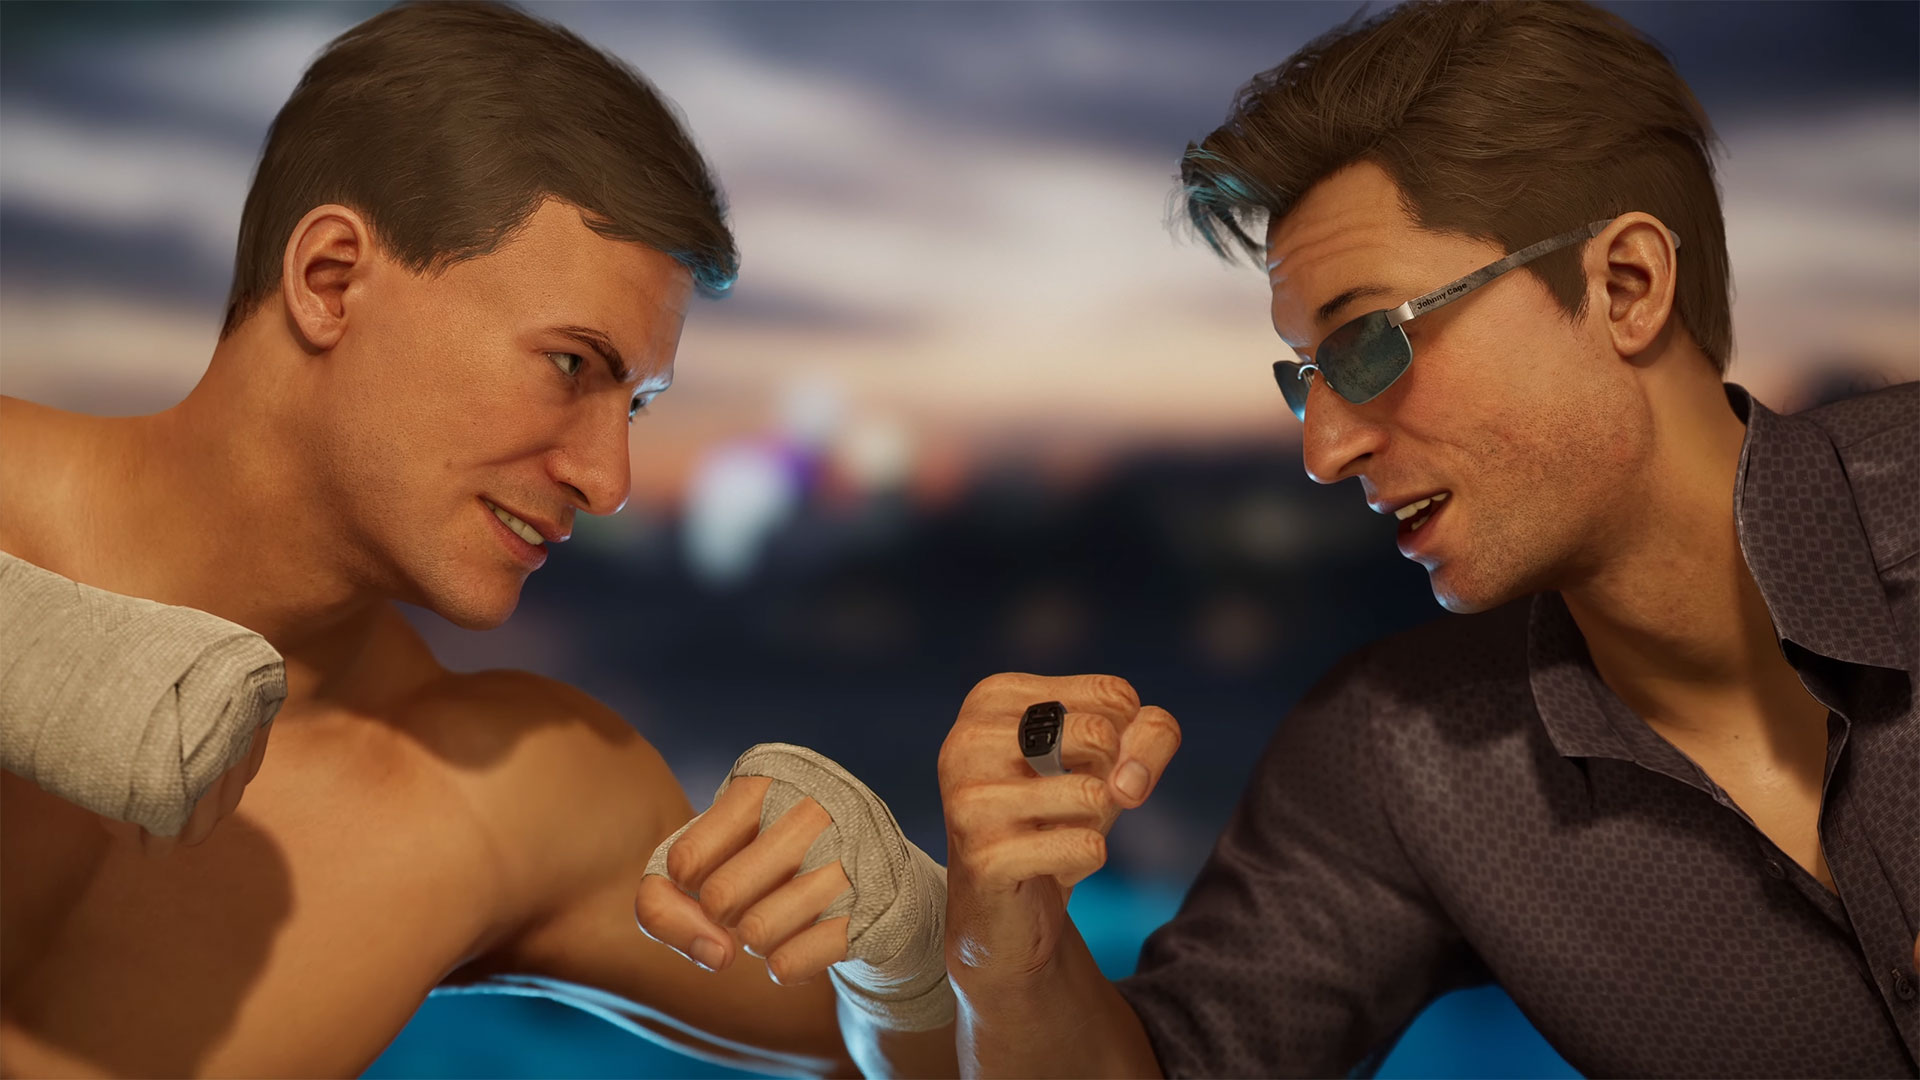 Mortal Kombat 1 finally introduces a Jean-Claude Van Damme skin for Johnny Cage